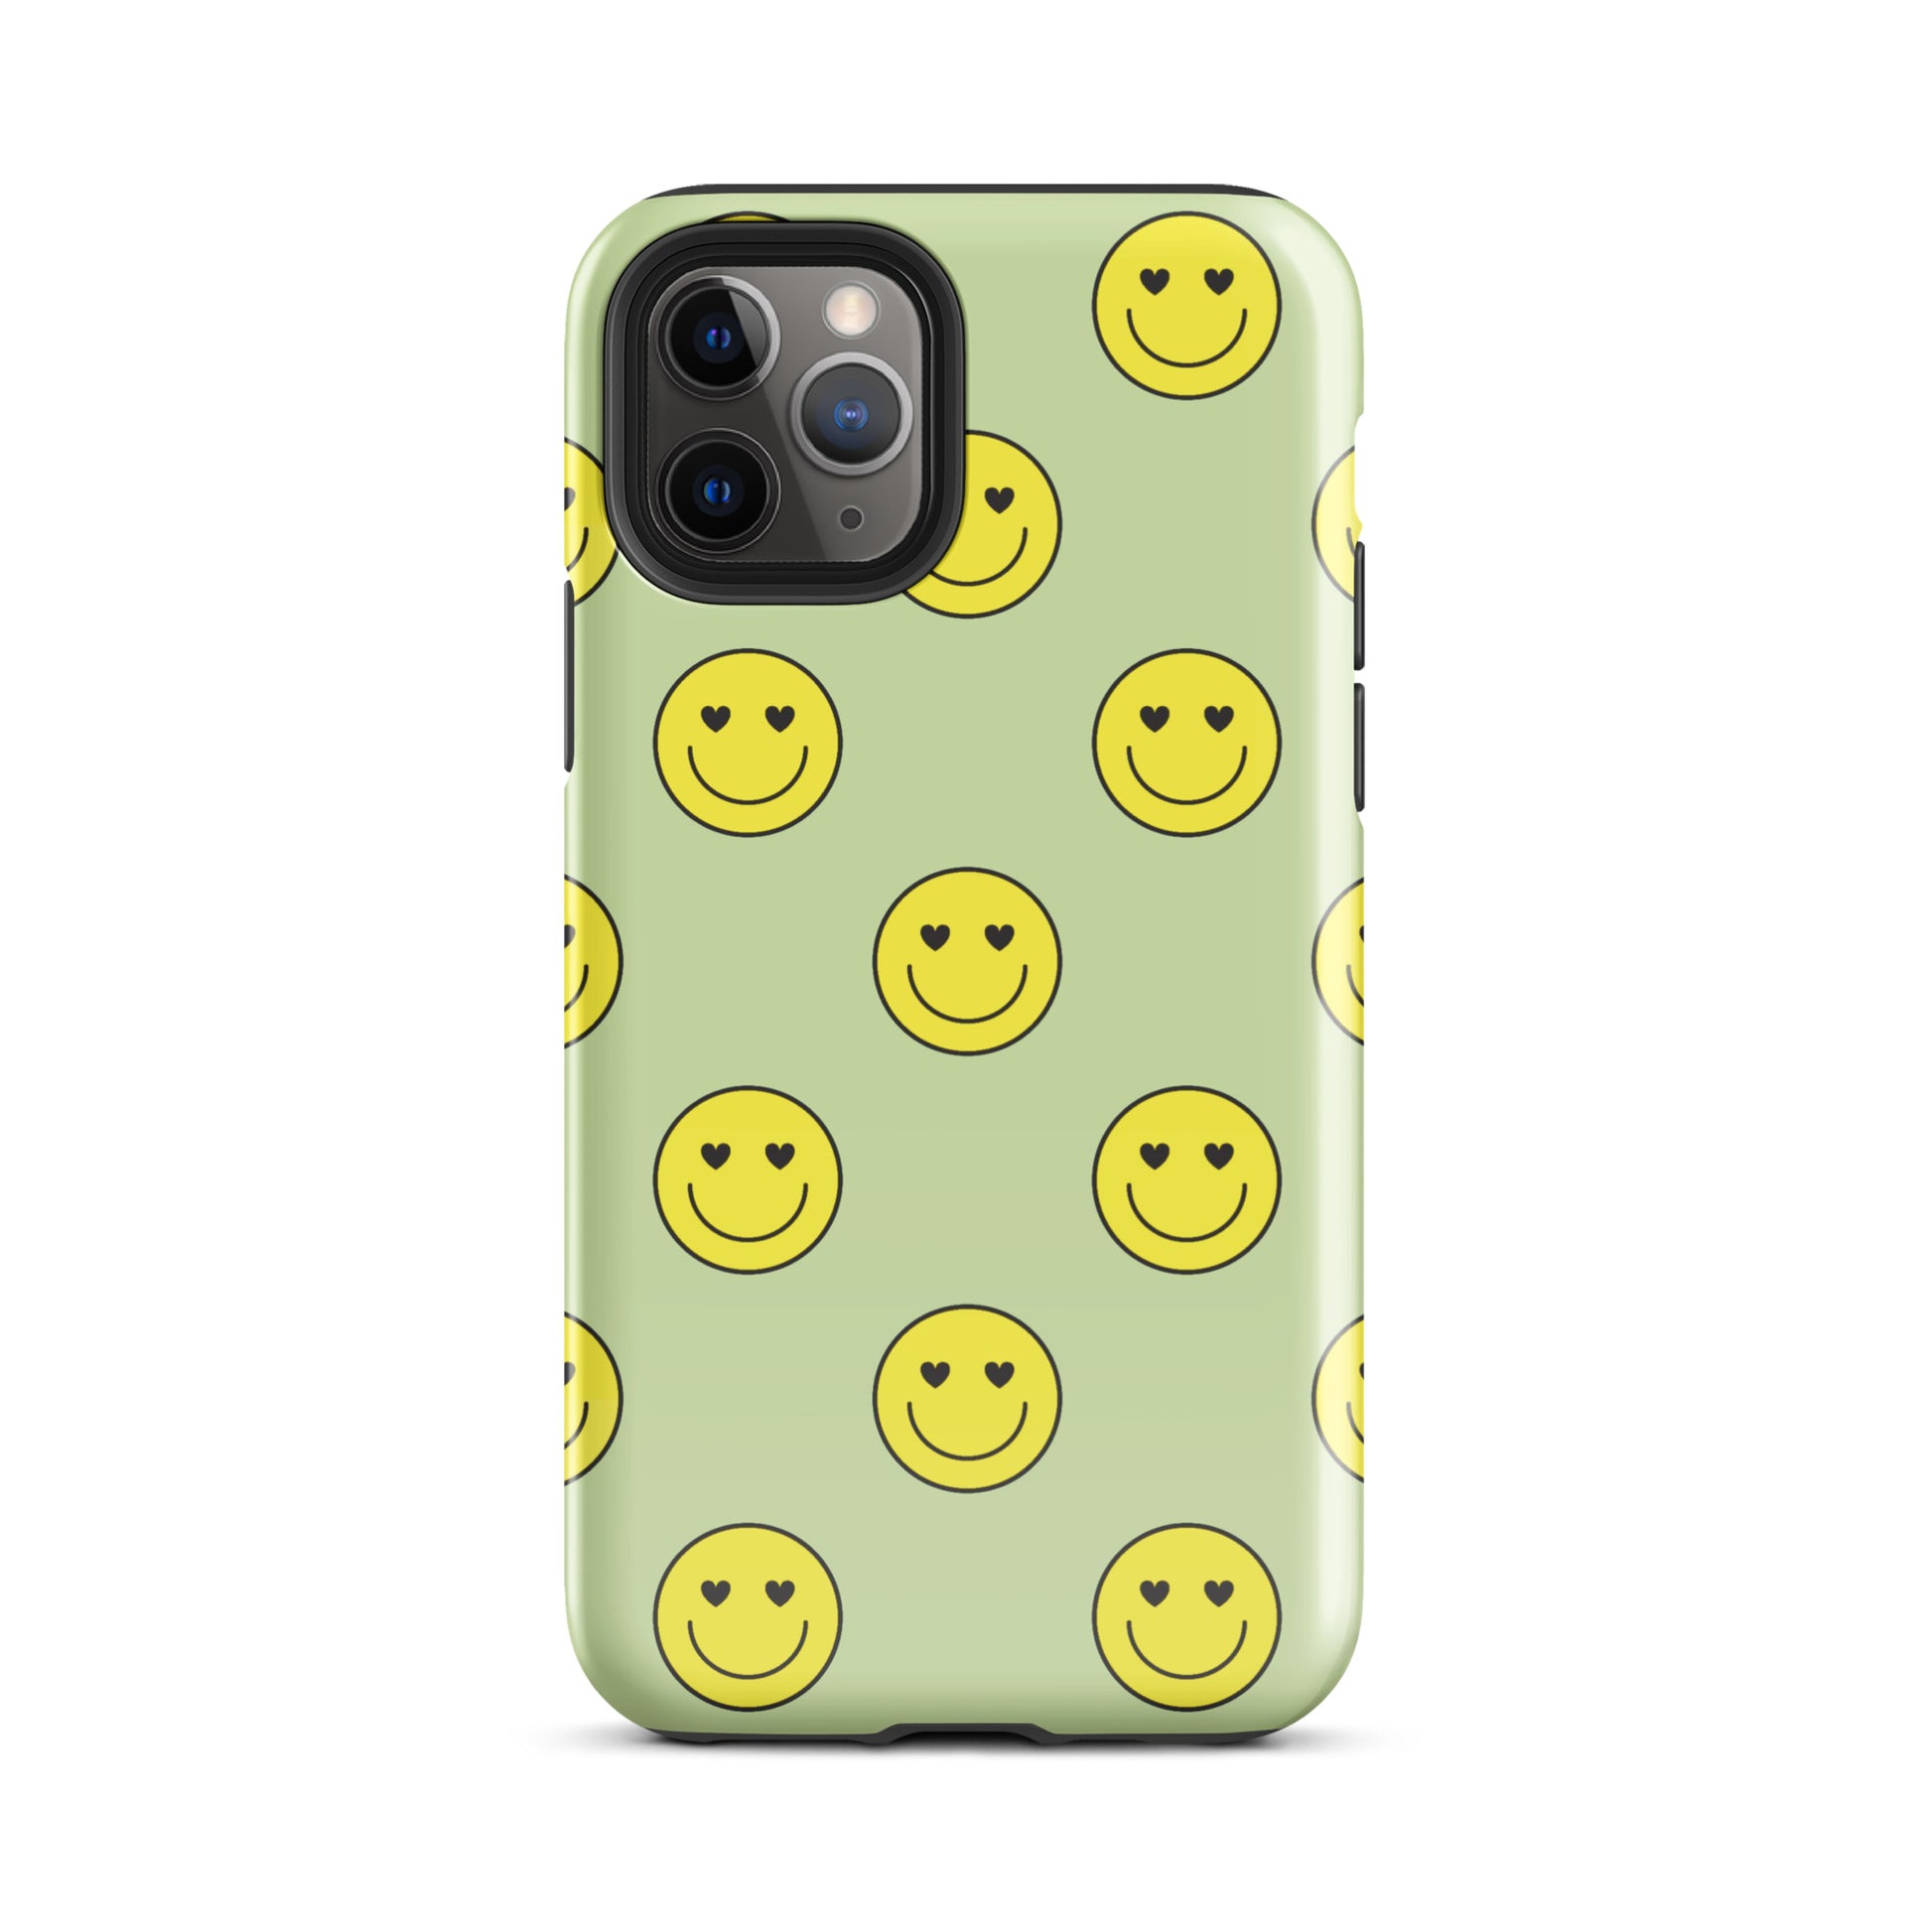 Neon Smiley Faces iPhone Case iPhone 11 Pro Glossy